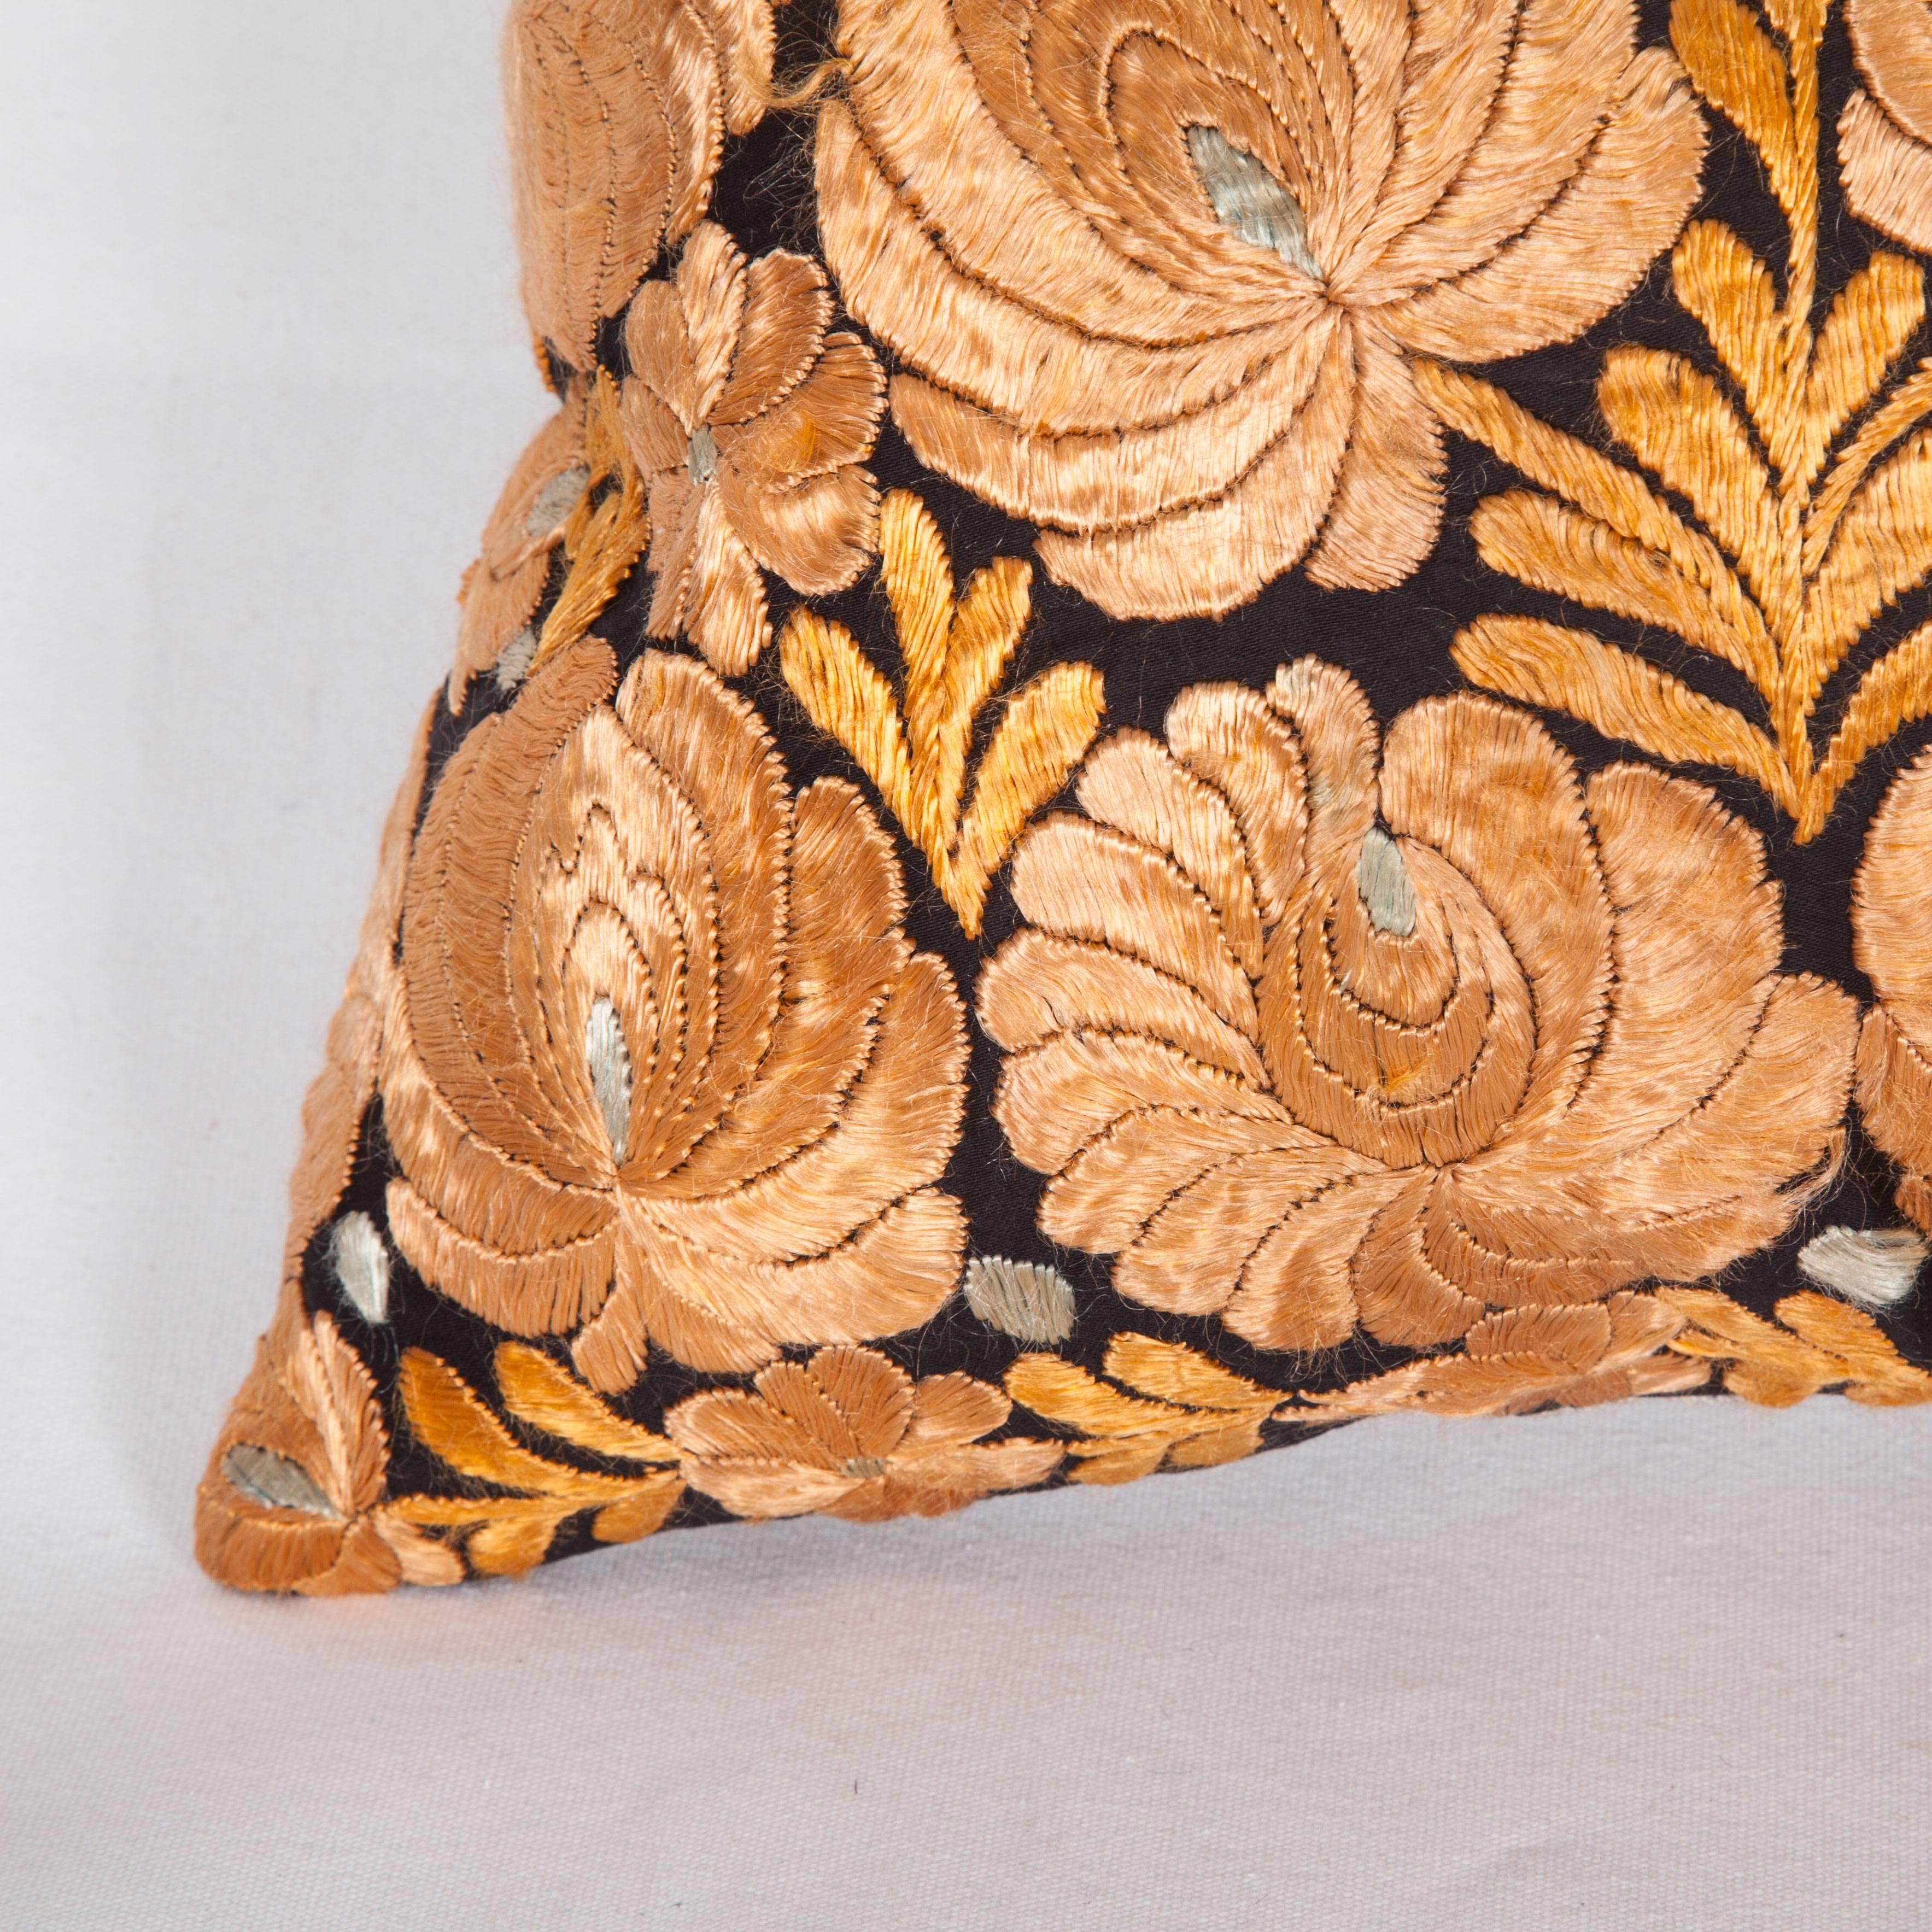 Embroidered Antique Pillow Made Out of an Hungarian Matyo Embroidery